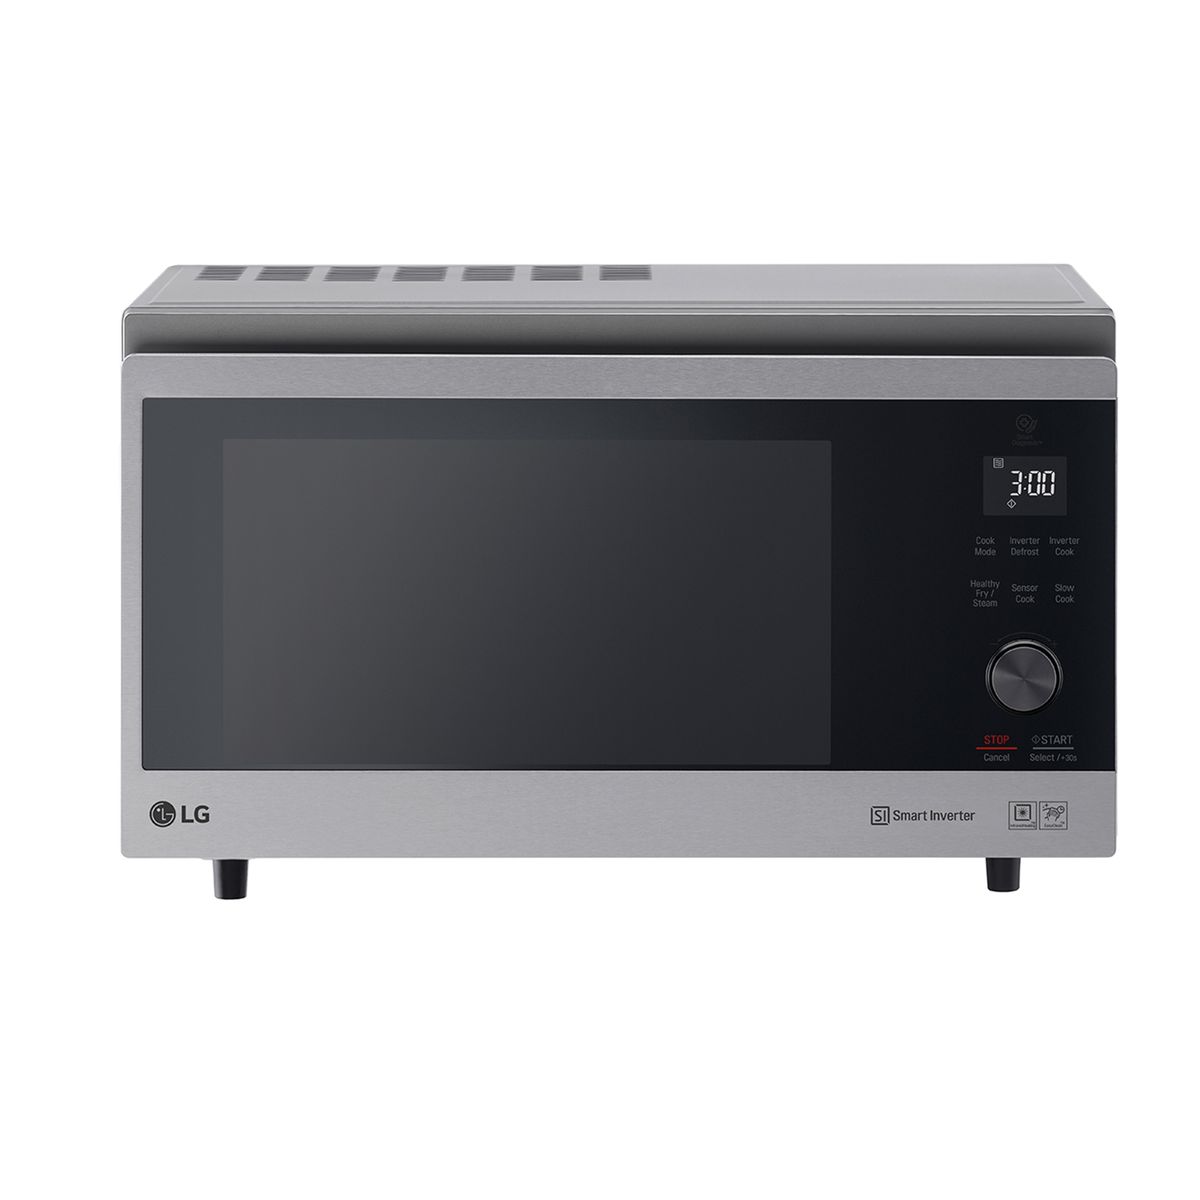 LG - Neochef - Convection oven - Stainless Steel